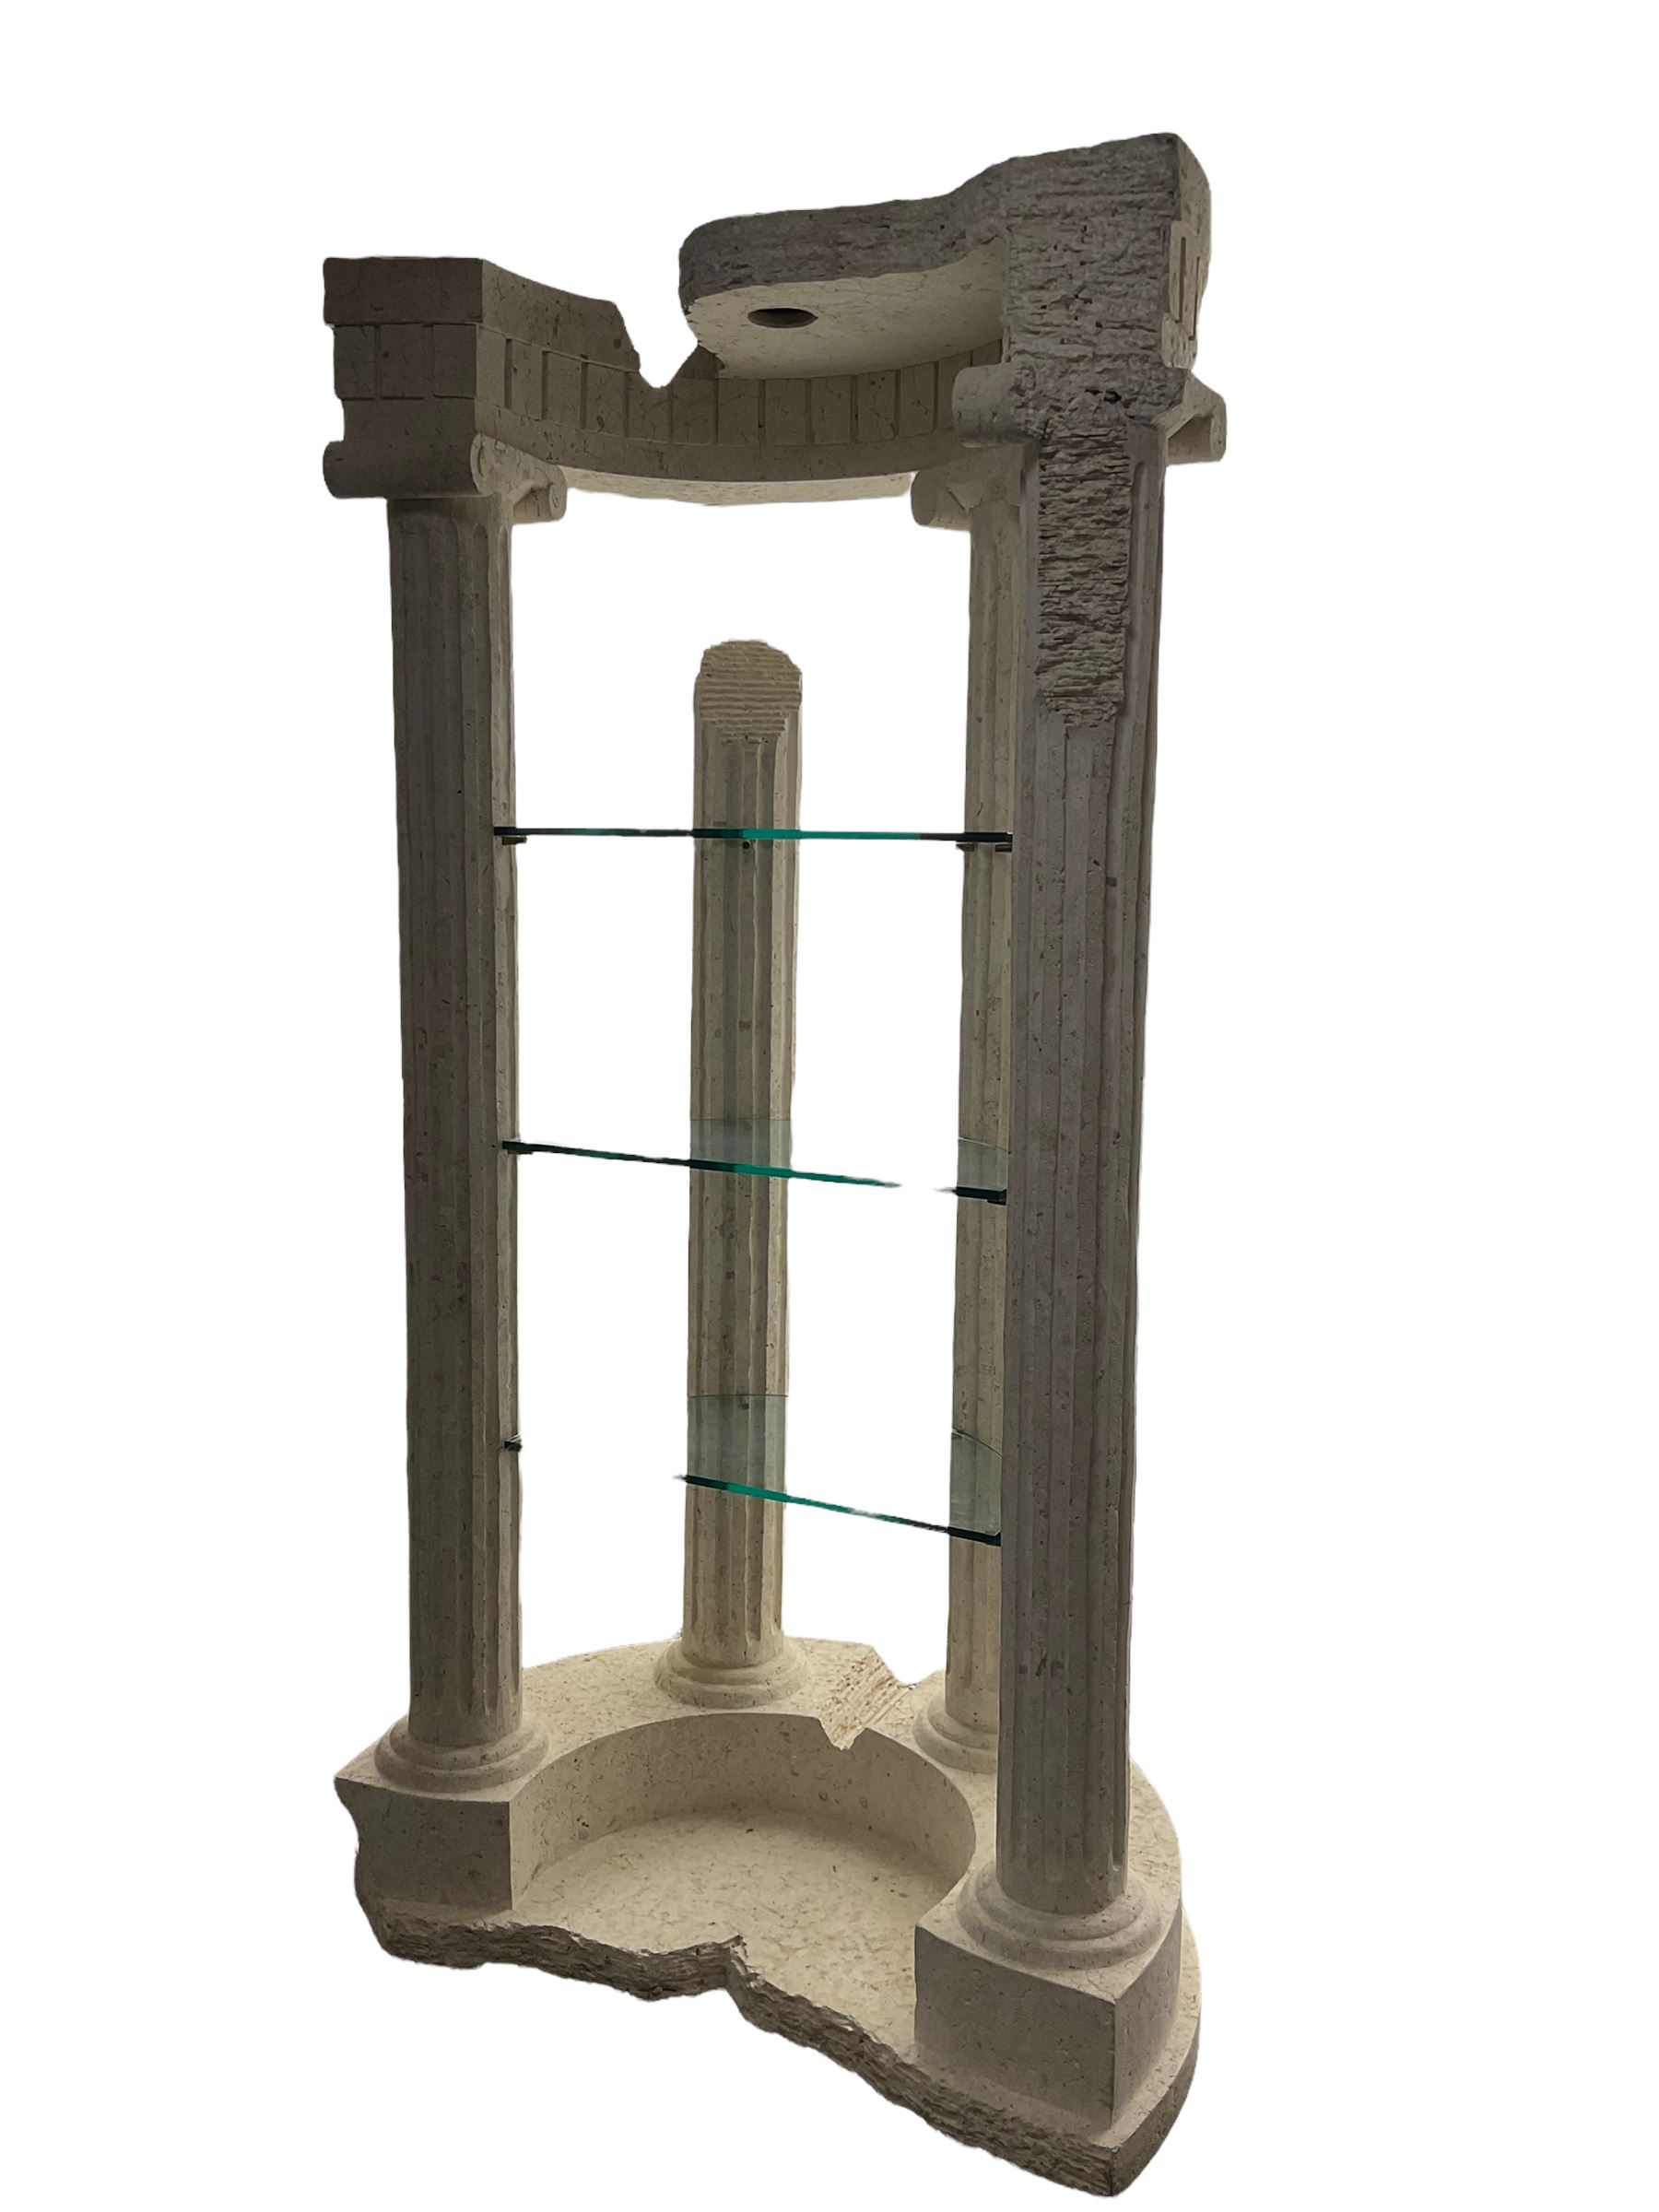 Cast architectural stone effect column display stand - Image 3 of 6